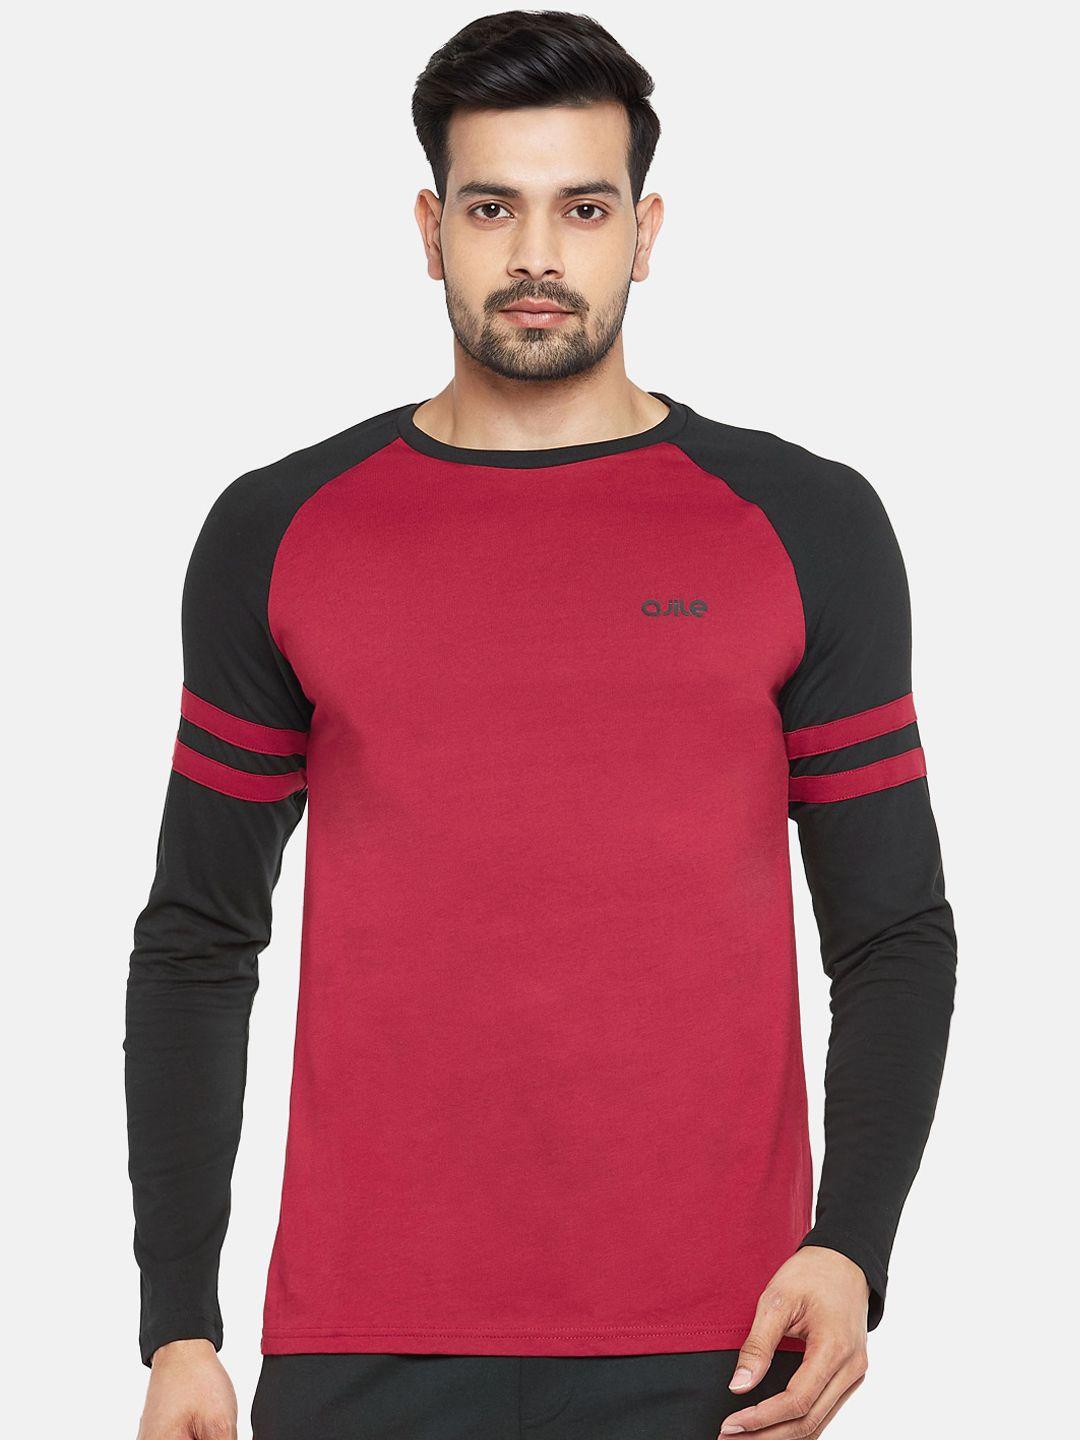 ajile-by-pantaloons-men-red--black-colourblocked-slim-fit-round-neck-pure-cotton-t-shirt